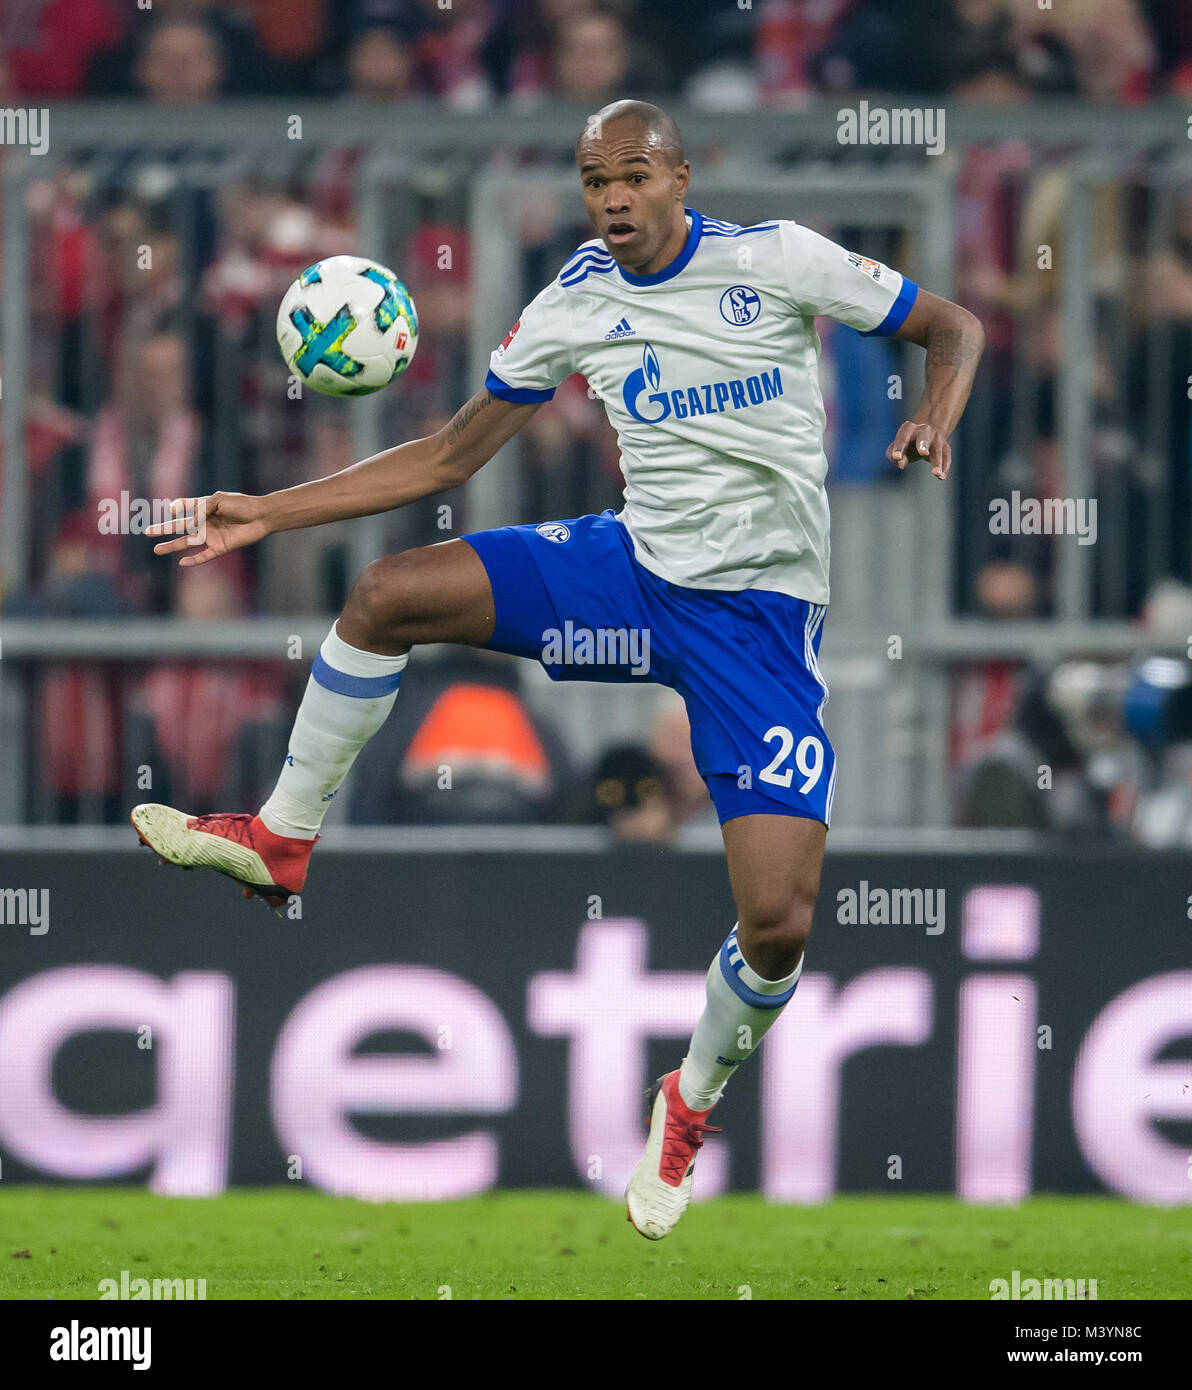 Munich, Germany. 10th Feb, 2018. Schalke 04's Naldo plays the ball during the match against Bayern Munich at the Allianz Arena in Munich, Germany, 10 February 2018. · NO WIRE SERVICE · Credit: Thomas Eisenhuth/dpa-Zentralbild/ZB/dpa/Alamy Live News Stock Photo